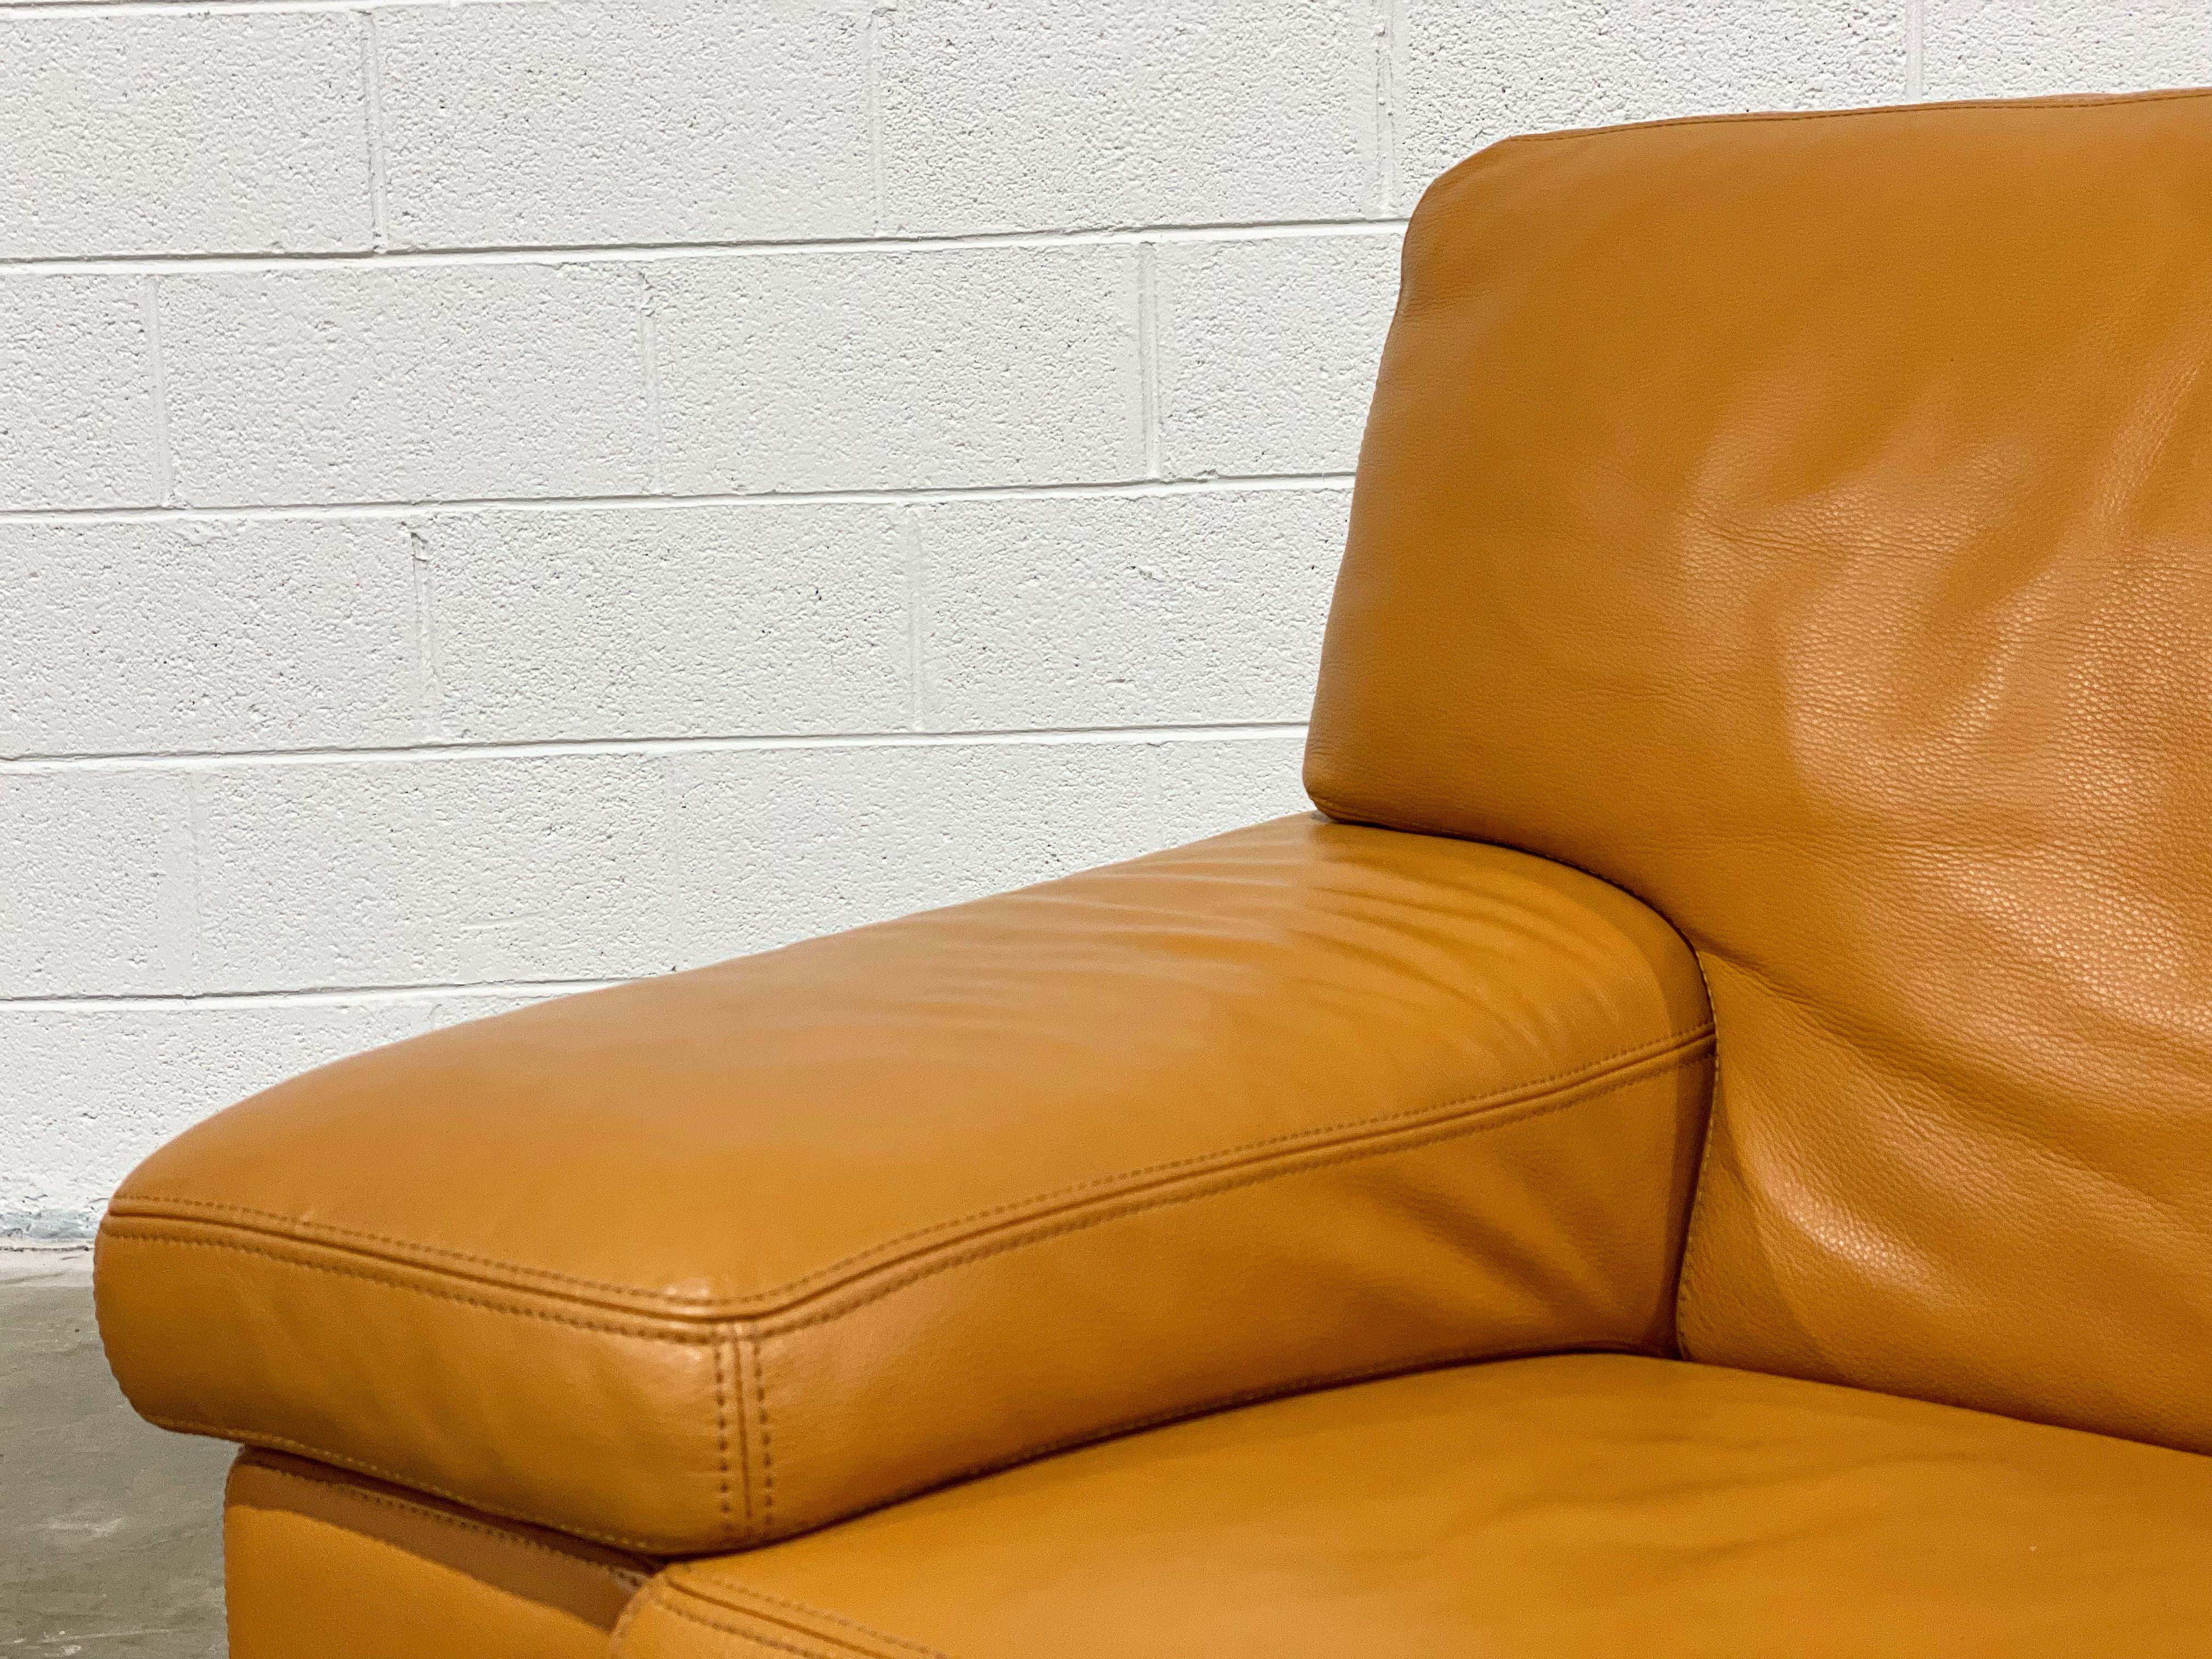 Late 20th Century Roche Bobois Vintage Post Modern Leather Club Chair, Butterscotch Tone Leather